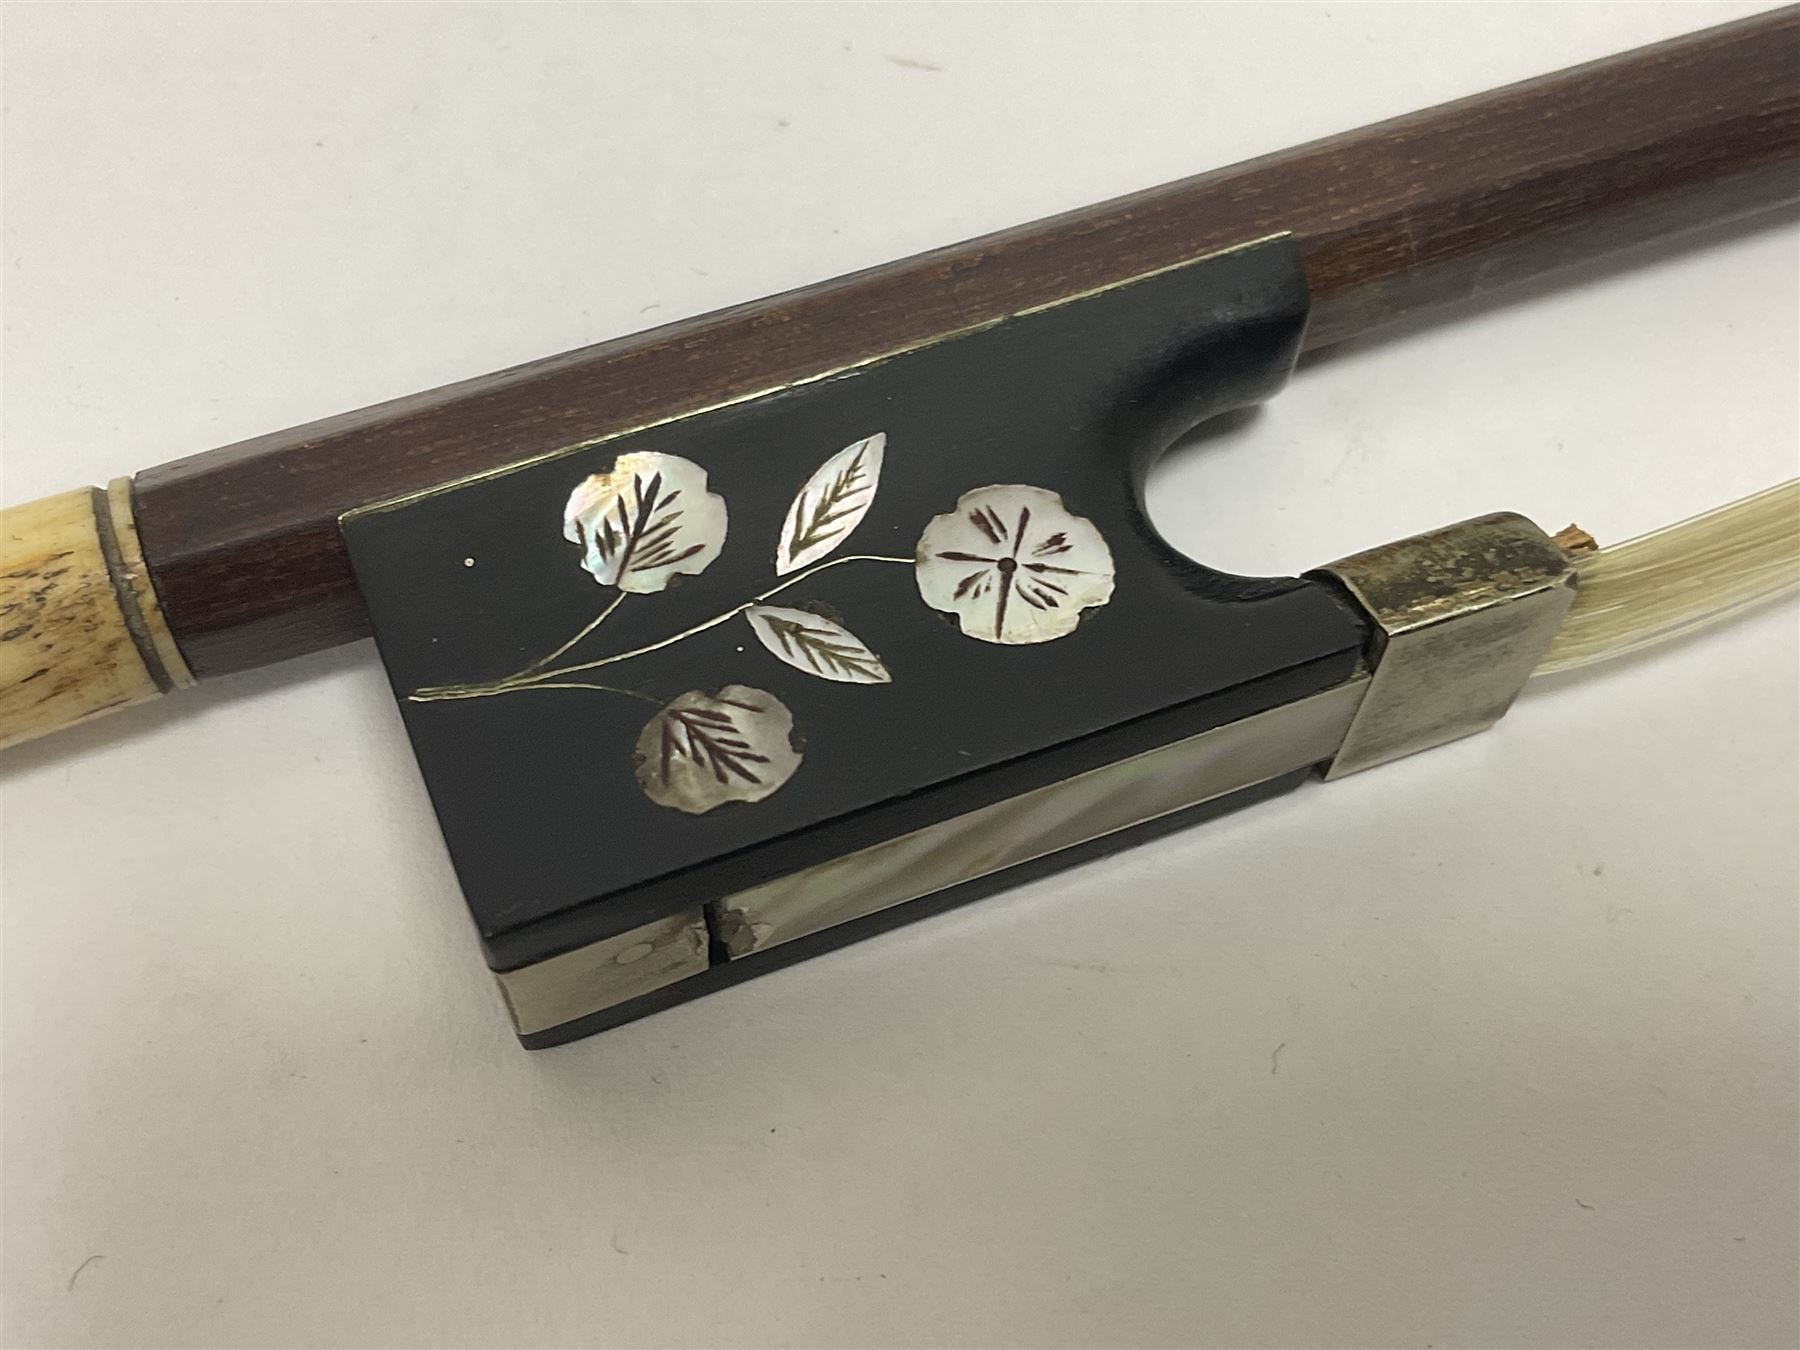 19th century wooden violin bow with a decorative mother of pearl inlay depicting flowers to the frog - Image 4 of 13